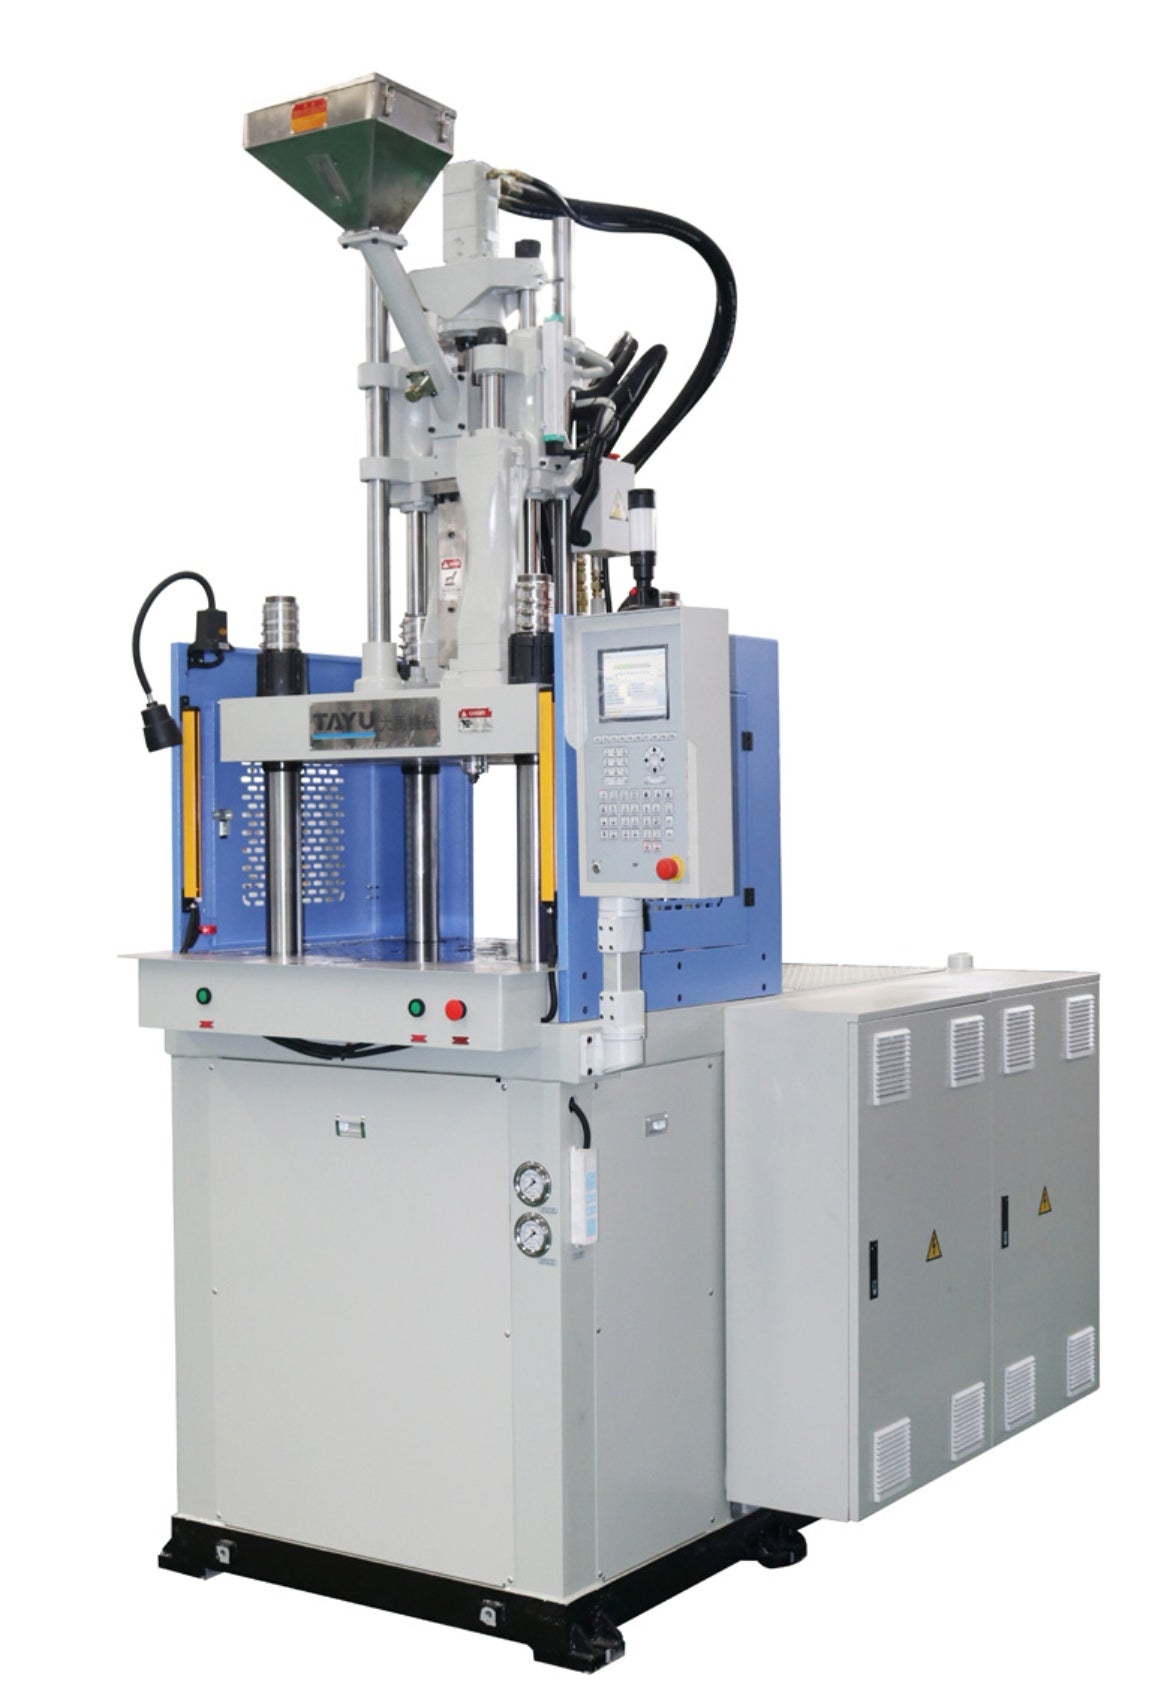 VIP ALL model of vertical injection machine